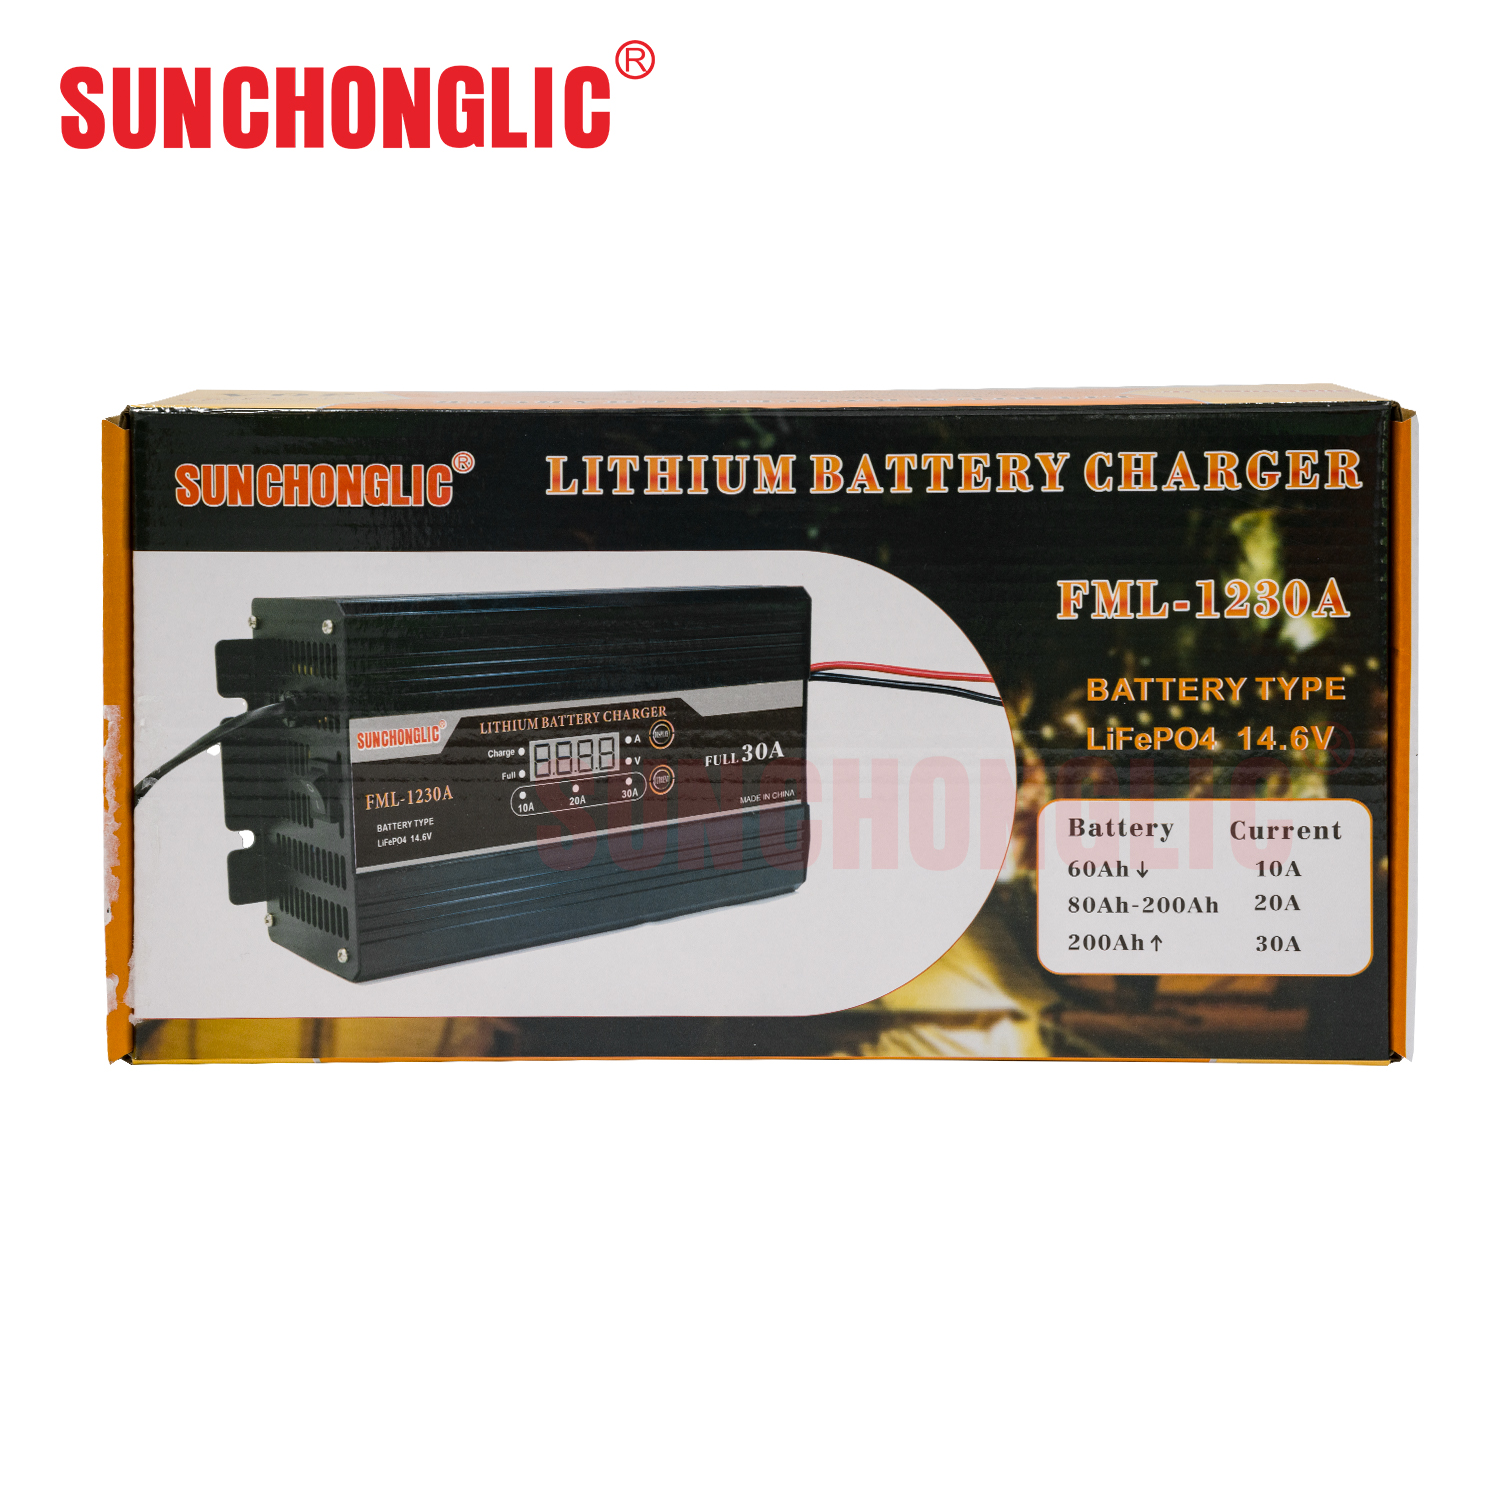 Lithium Battery Charger - FML-1230A